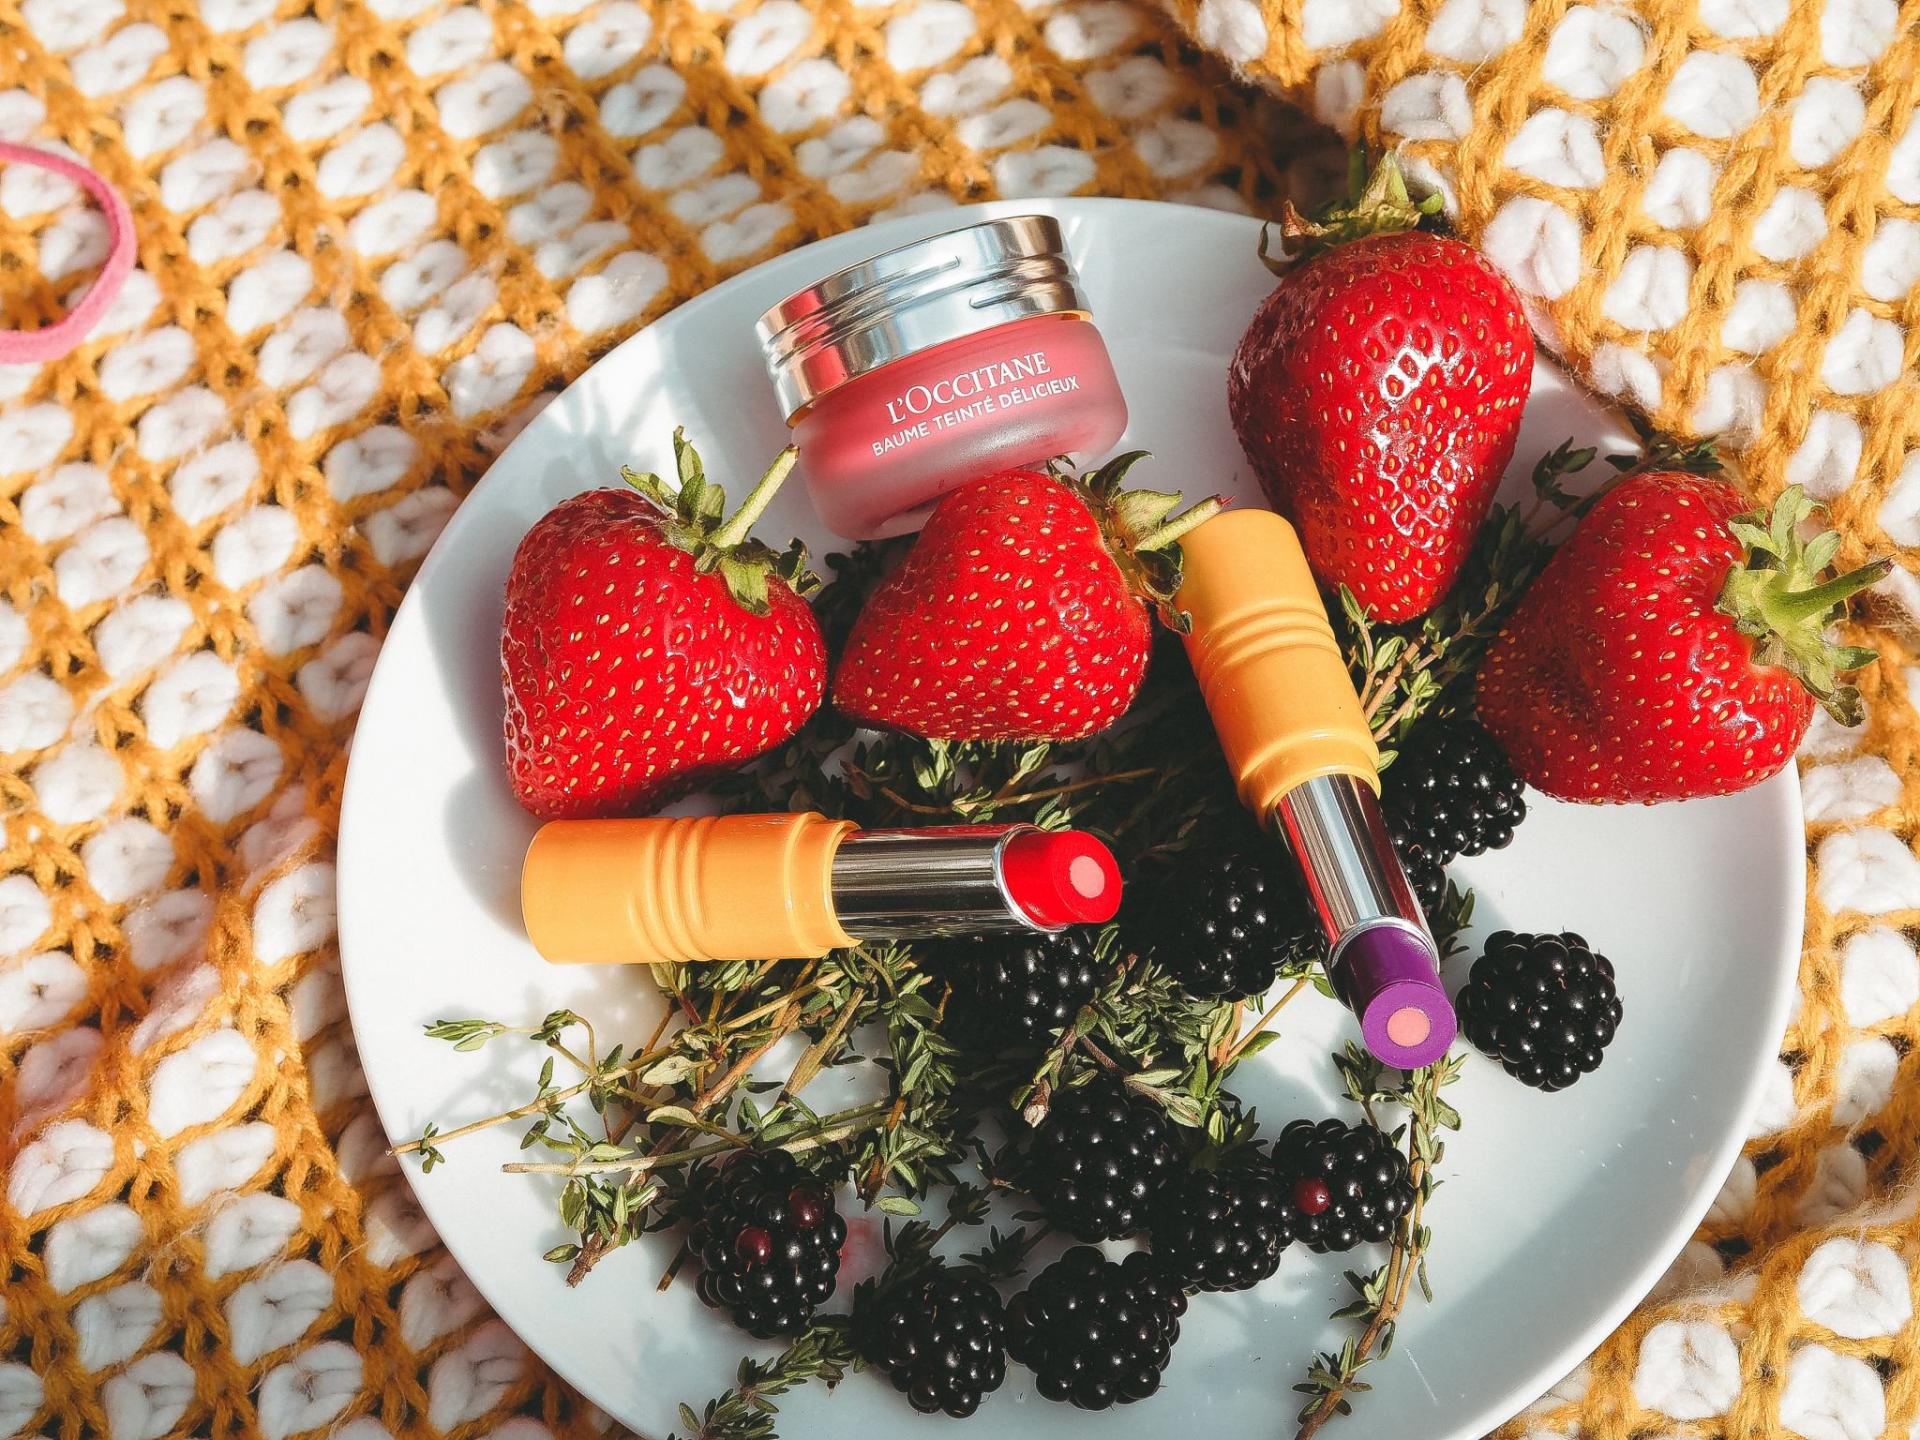 Enjoy a fruity beauty injection with L'Occitane